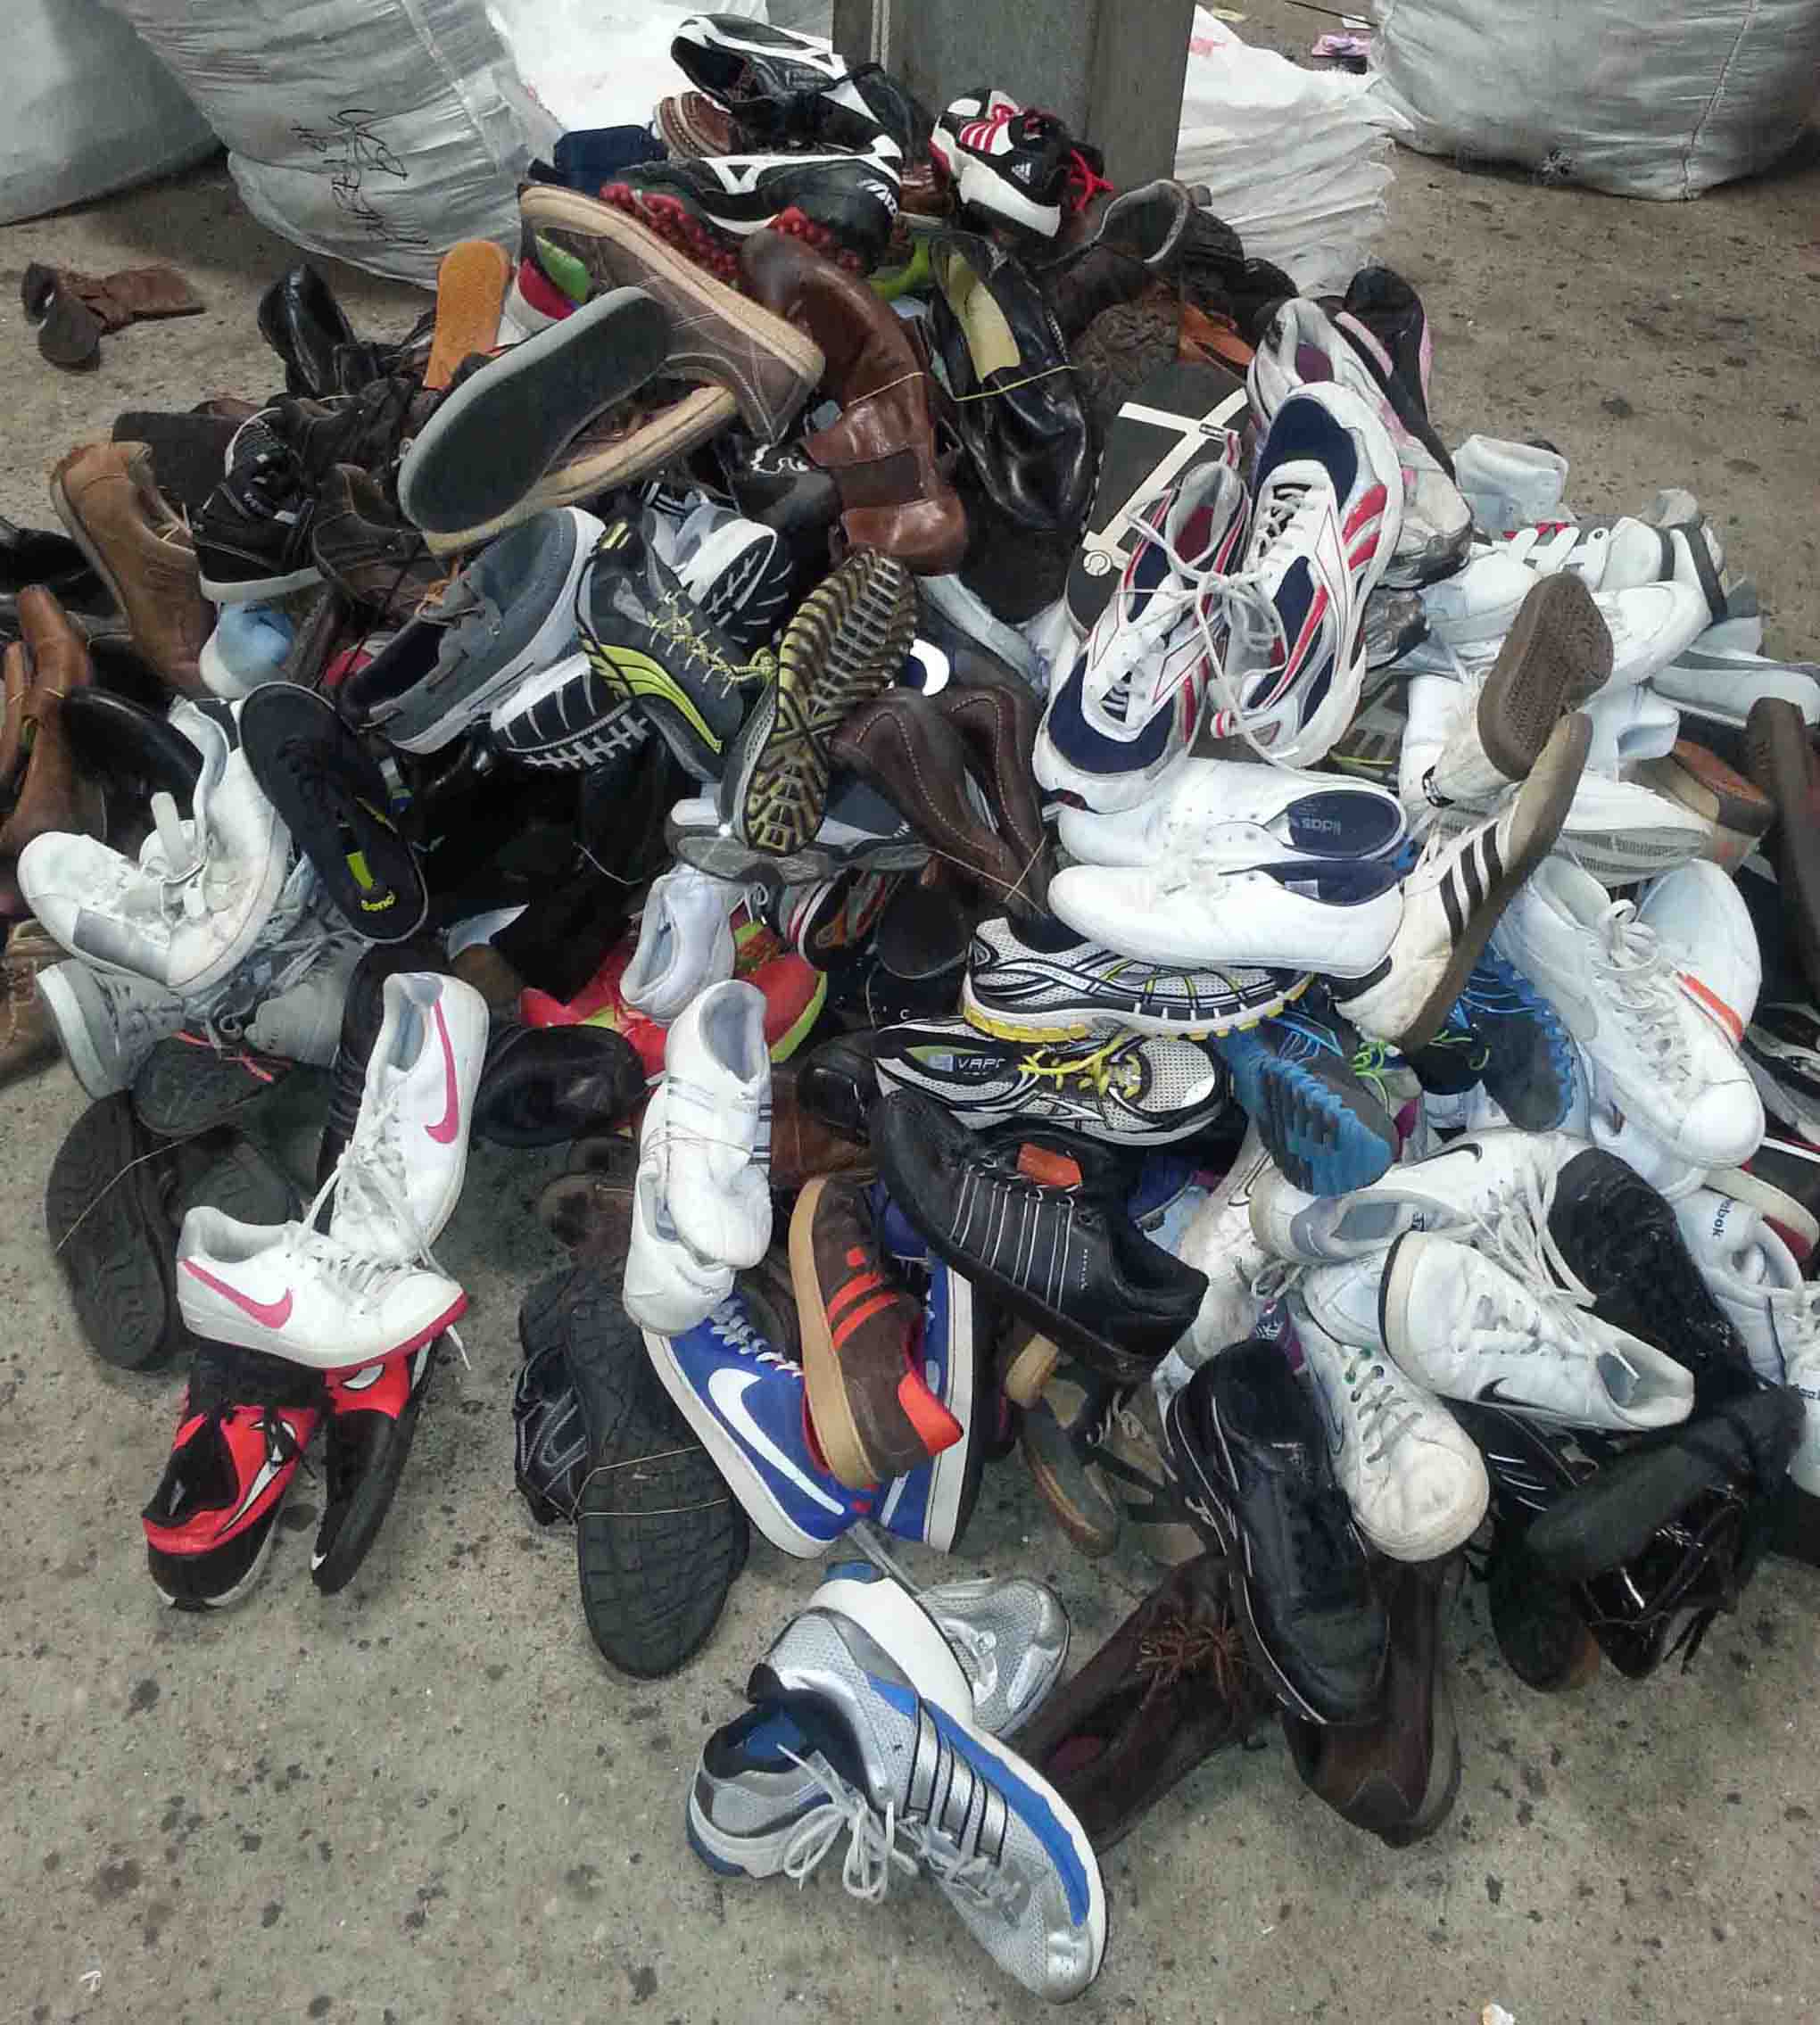 sell second hand trainers